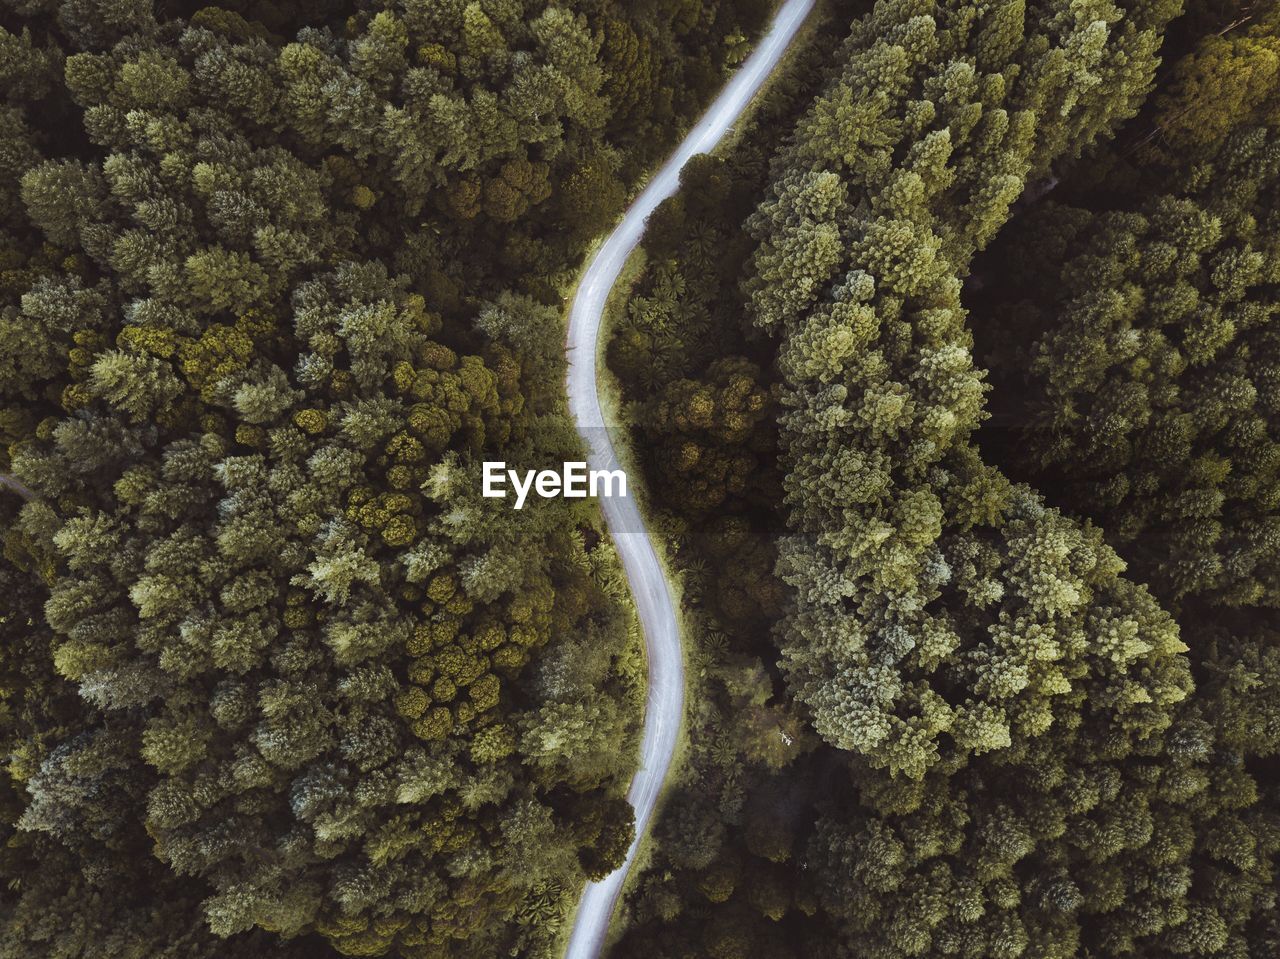 Drone view of curved road amidst trees